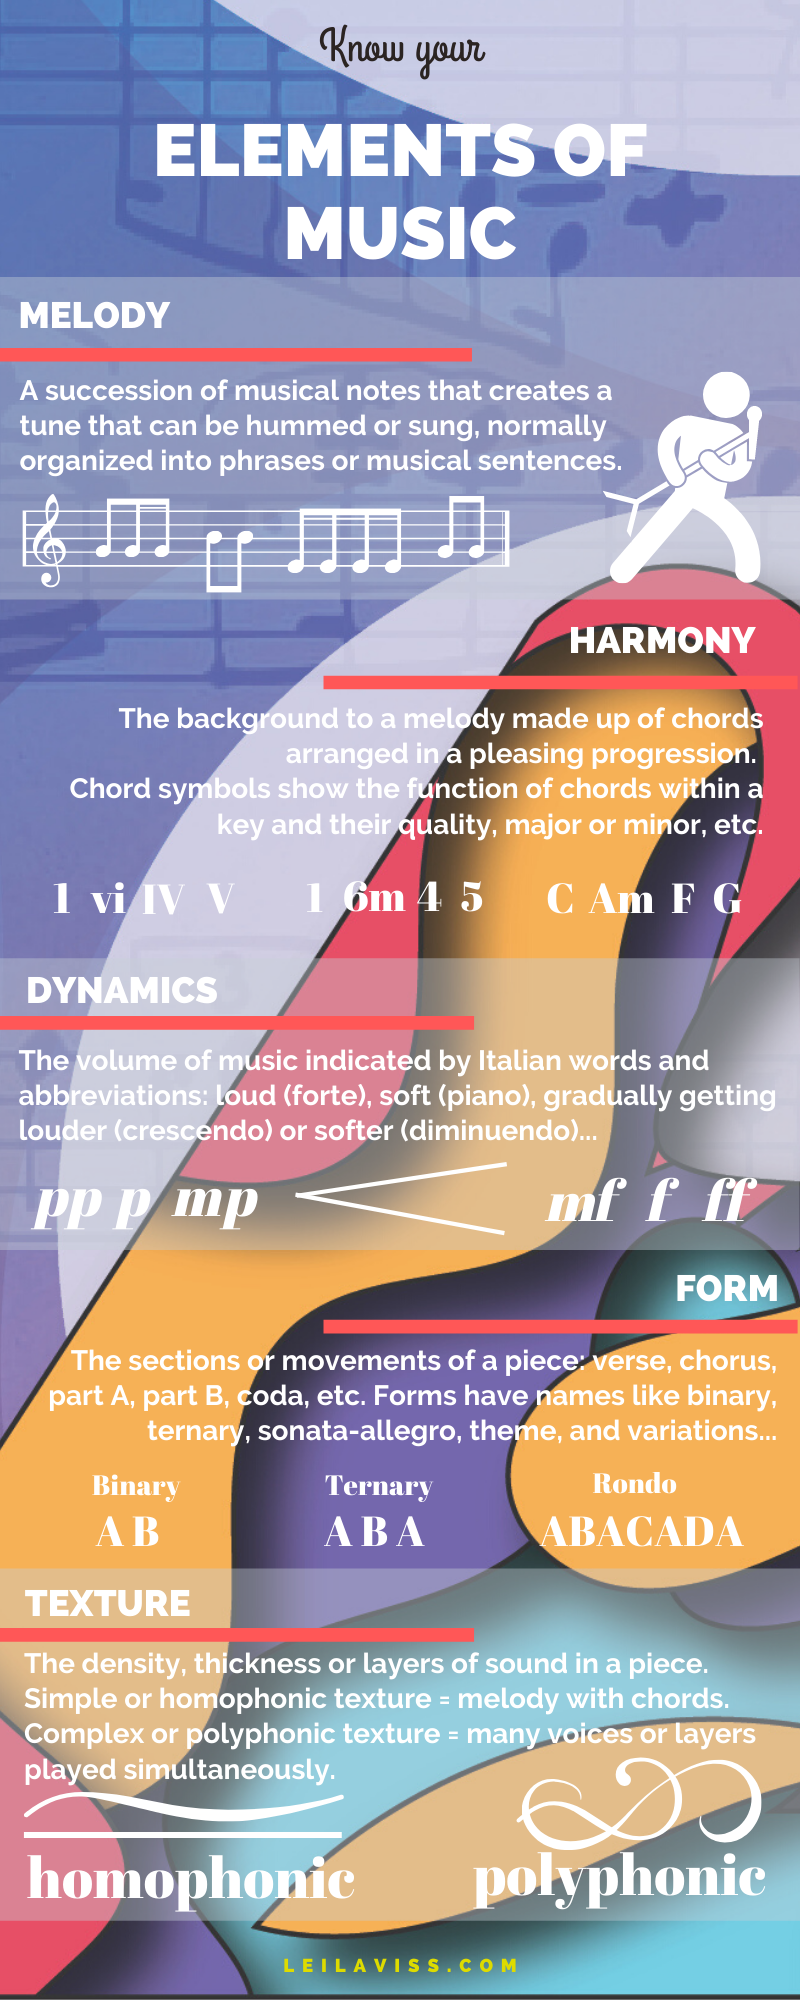 importance of elements of music